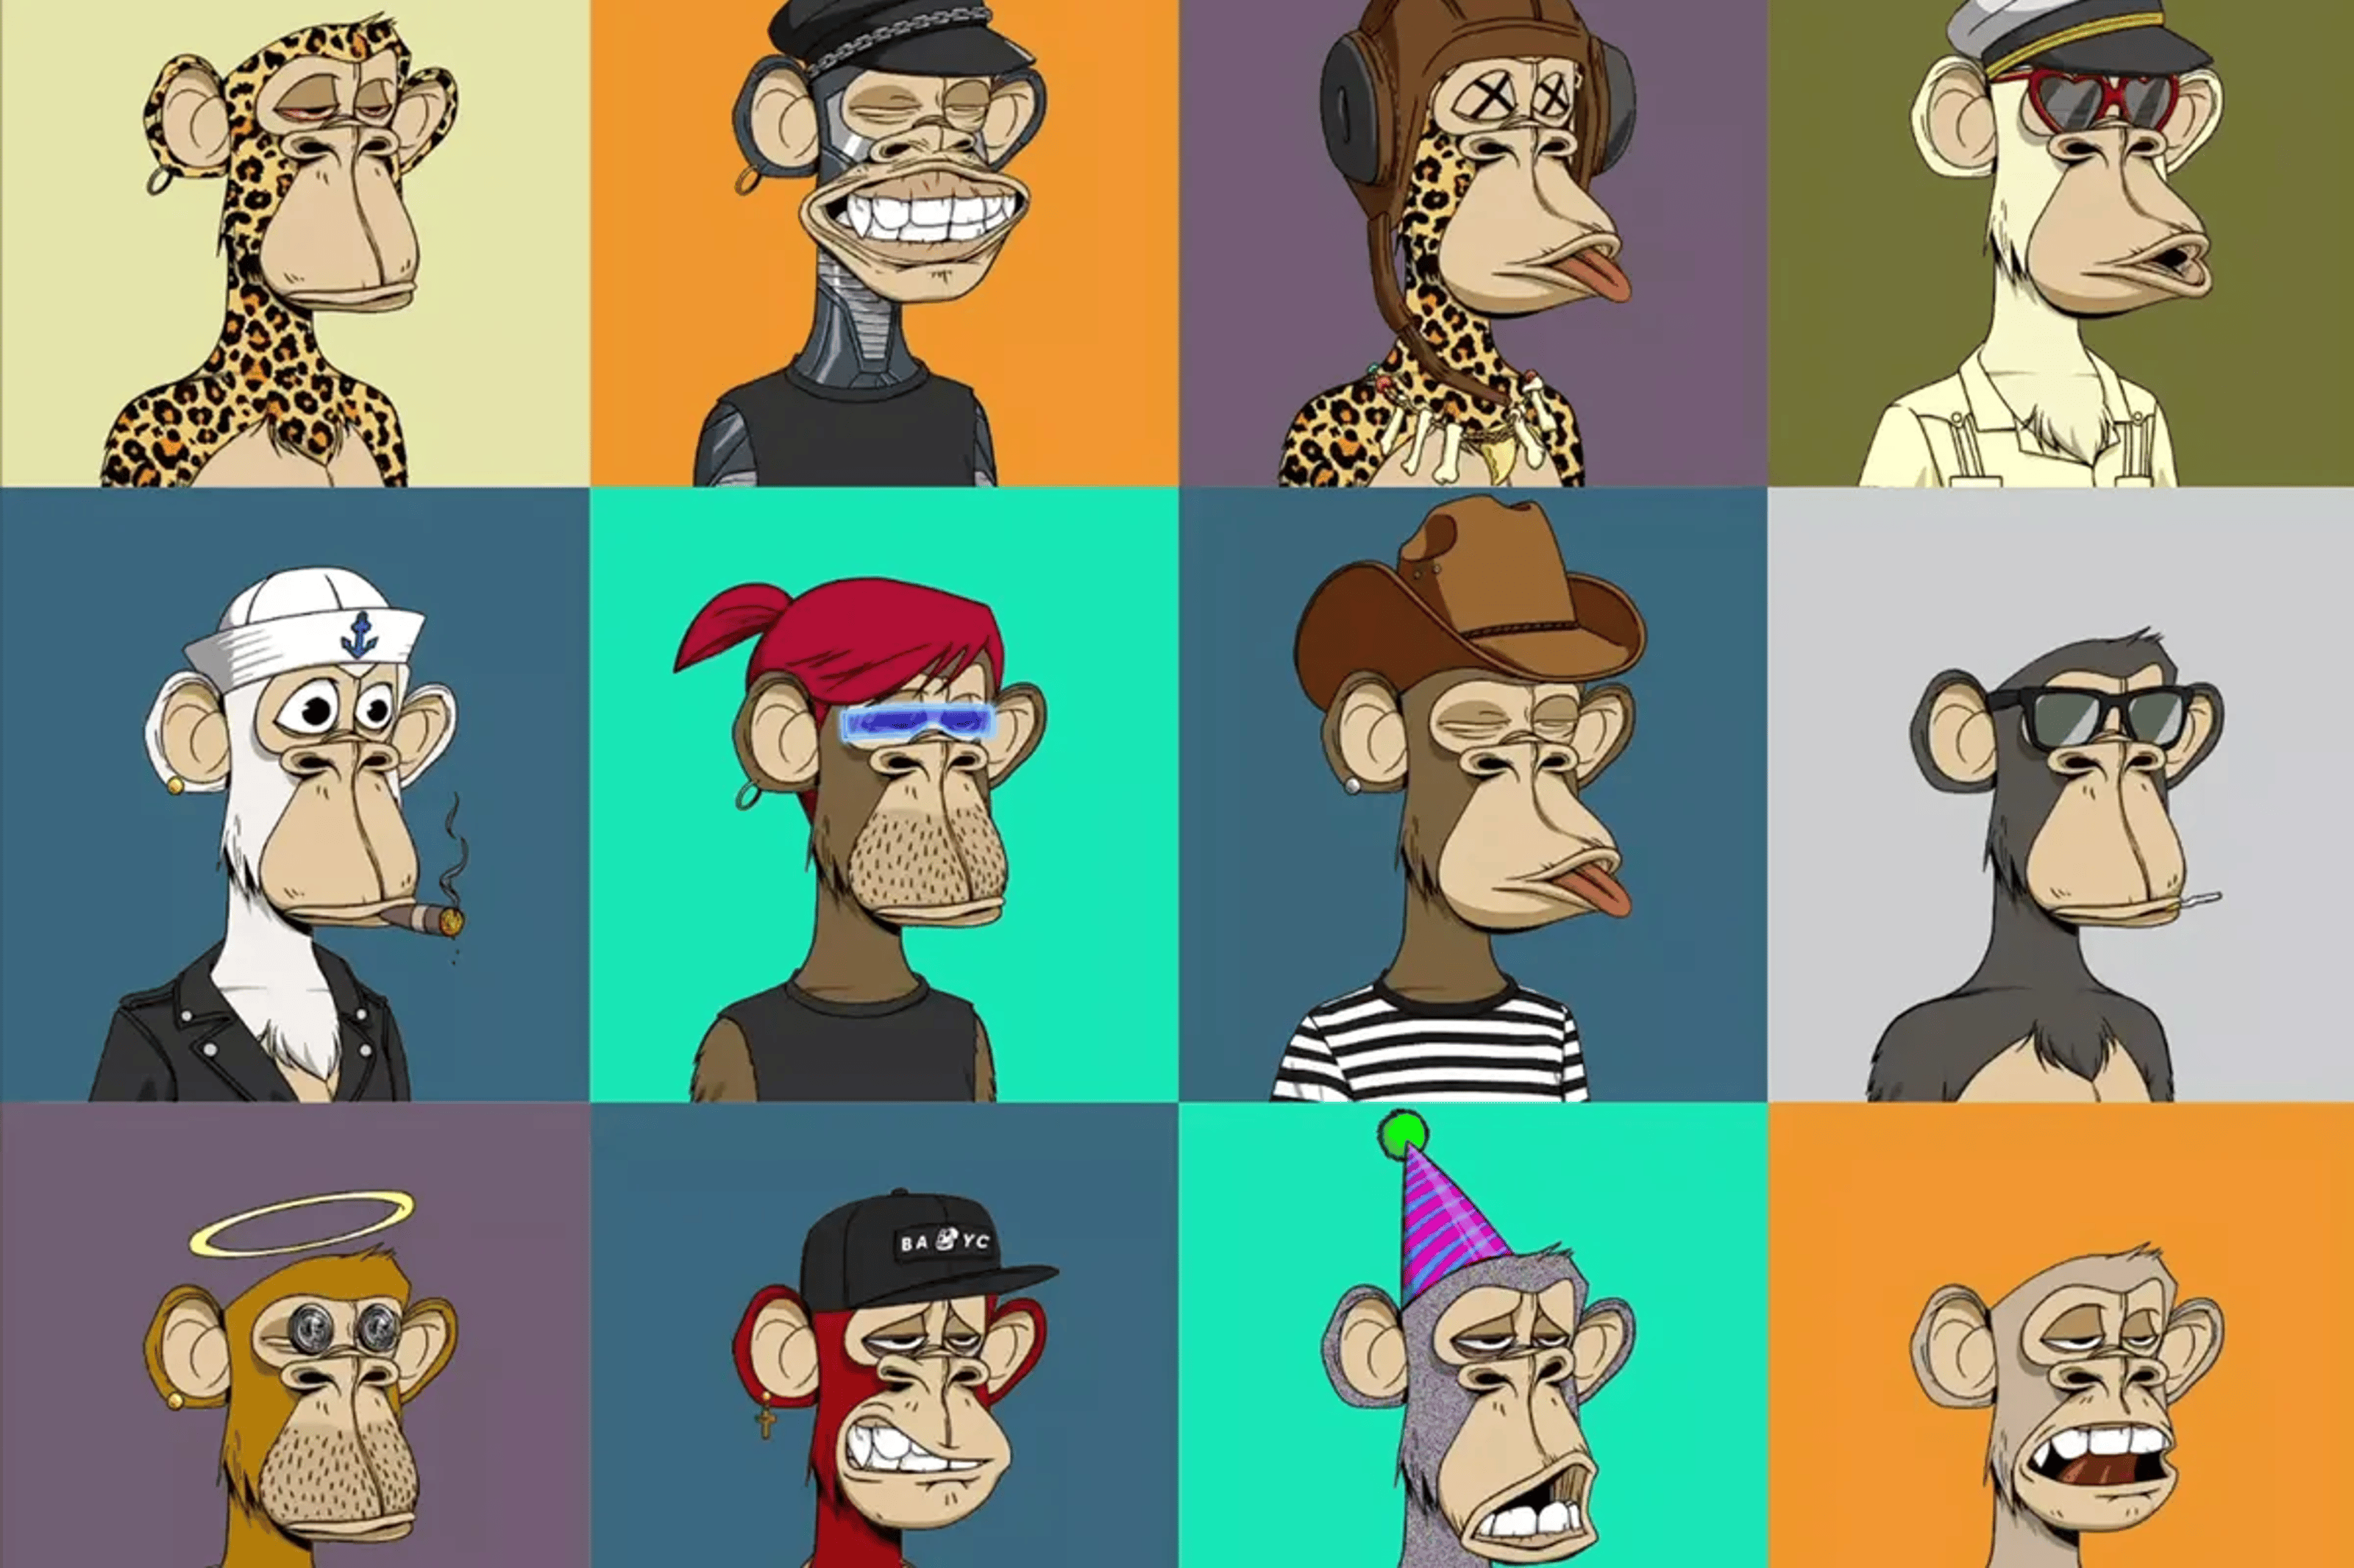 12 colorful ape cartoons drawn in different styles and styles.